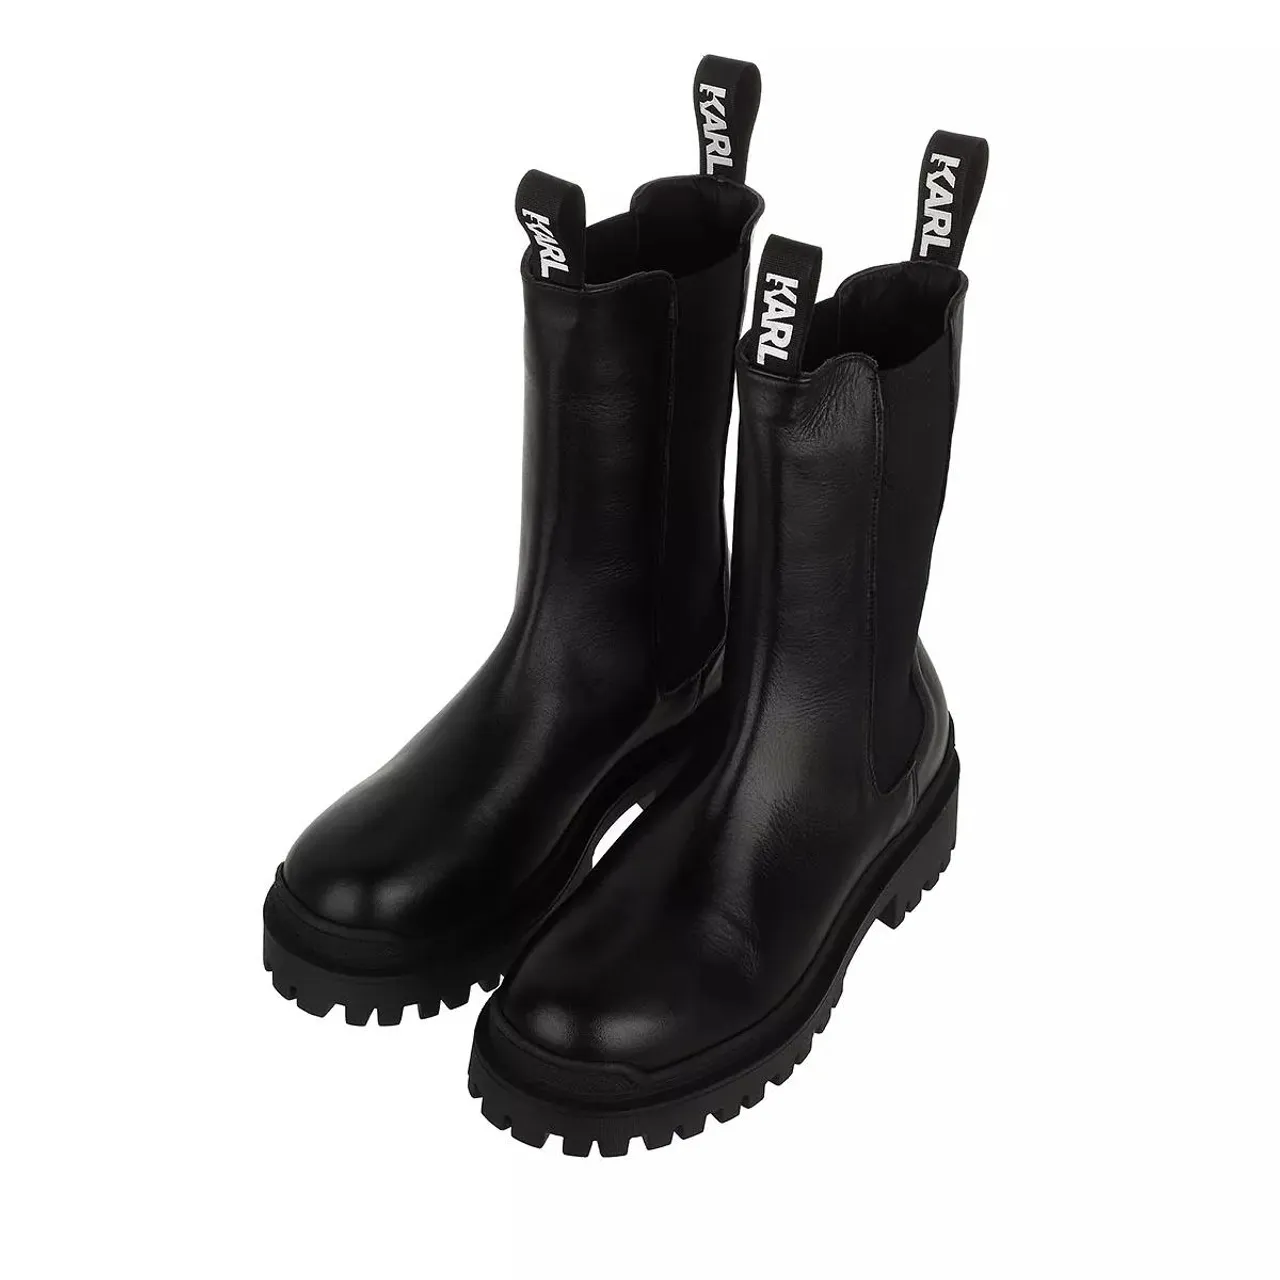 Karl Lagerfeld Boots & Ankle Boots - BIKER II Long Gore Boot - black - Boots & Ankle Boots for ladies